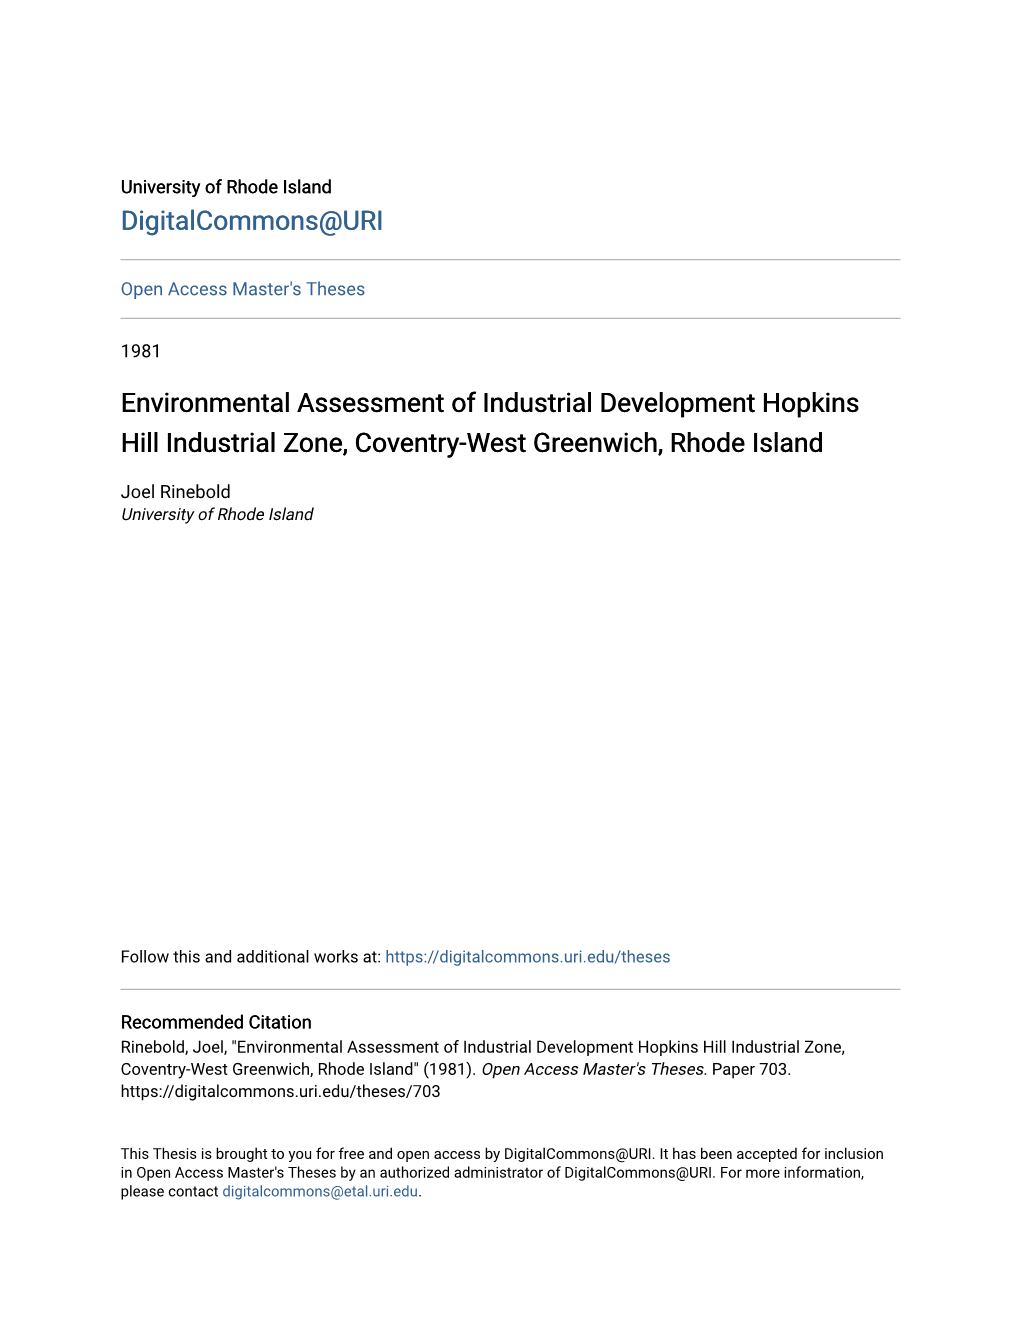 Environmental Assessment of Industrial Development Hopkins Hill Industrial Zone, Coventry-West Greenwich, Rhode Island